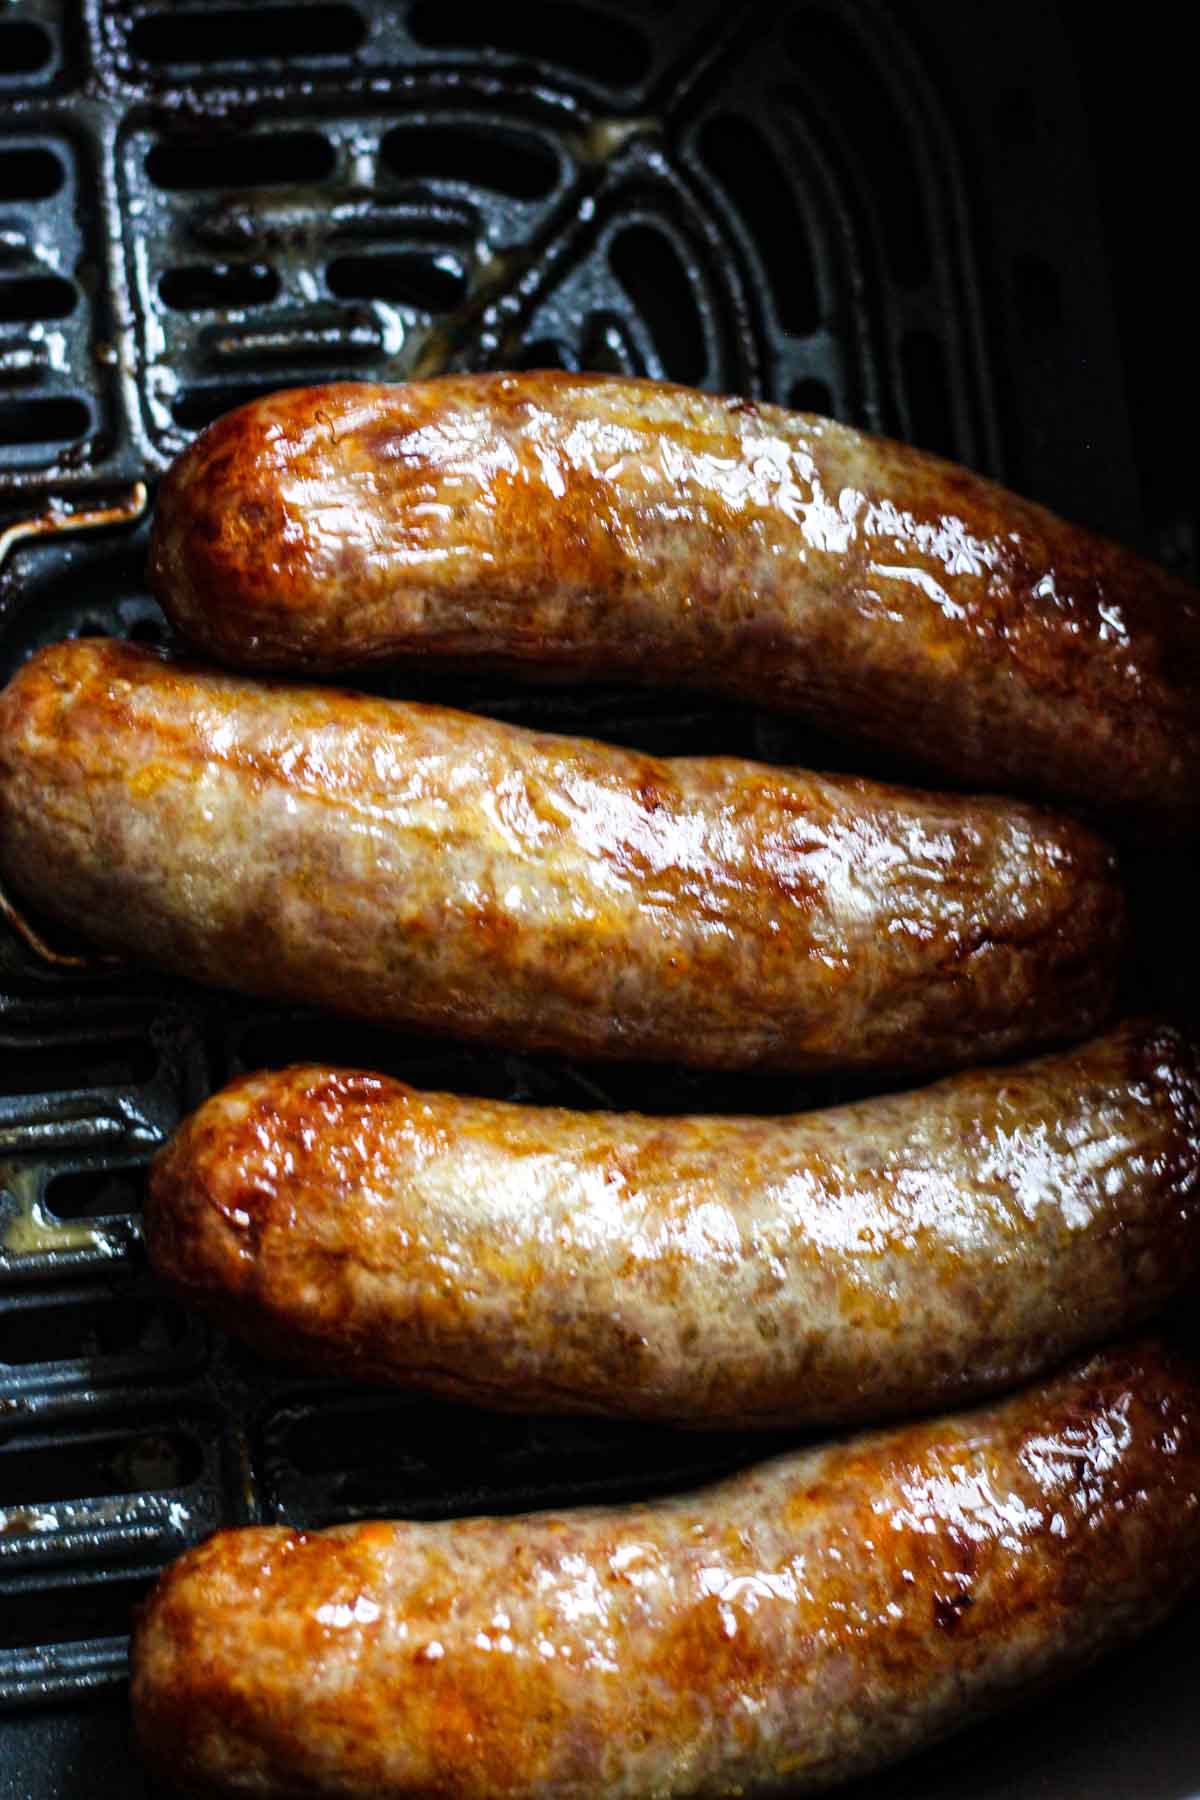 How to cook air fryer brats (johnsonville cheddar bratwurst) - The Top Meal